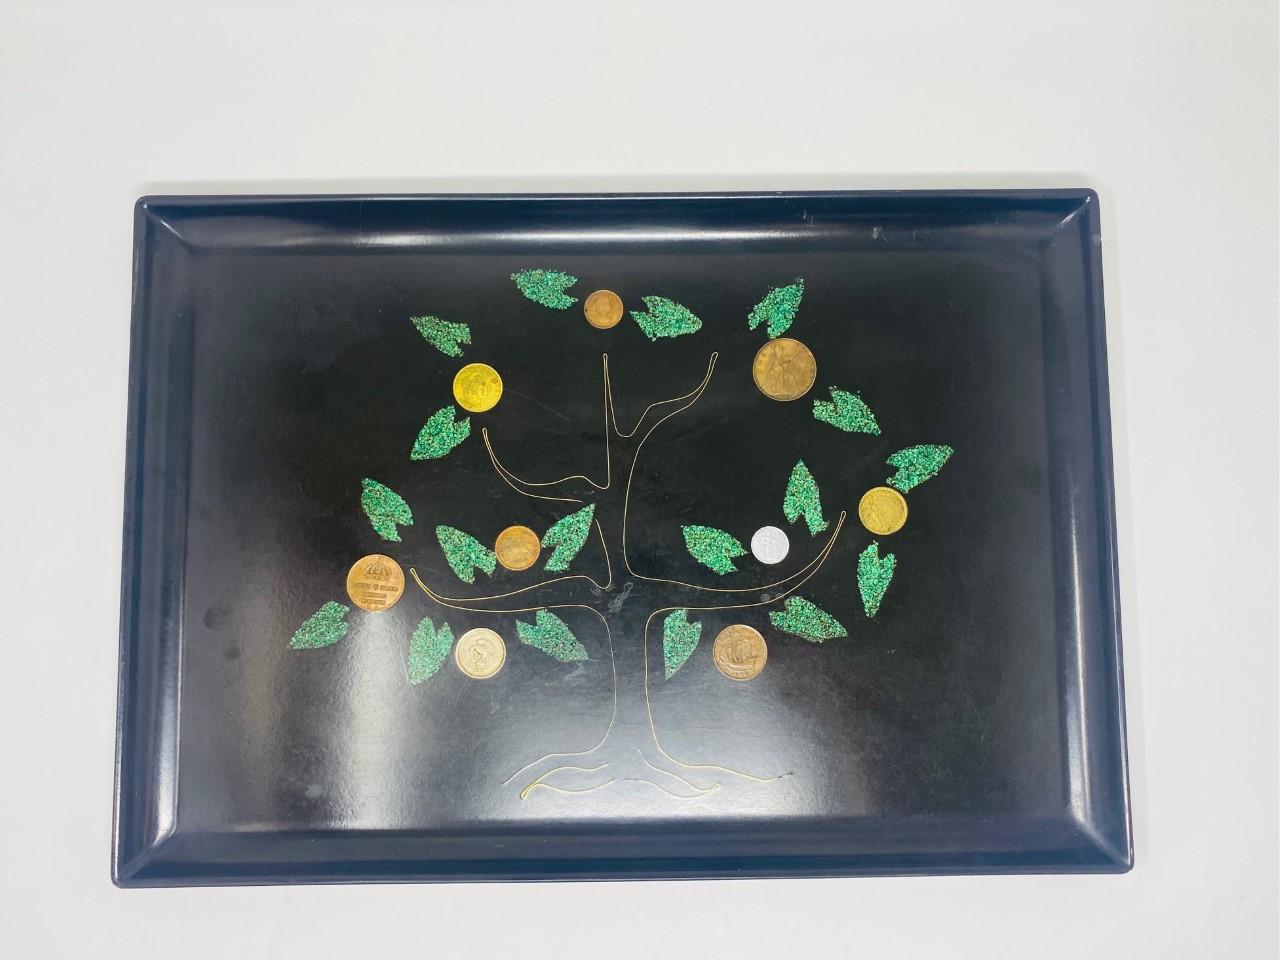 Mid-Century Modern money tree tray by Couroc Monterey California. These serving pieces are handmade by Master Crossman‘s, made from Shell, coins, wood and metals fused into a satin black resin base. This beautiful piece displays a tree design with